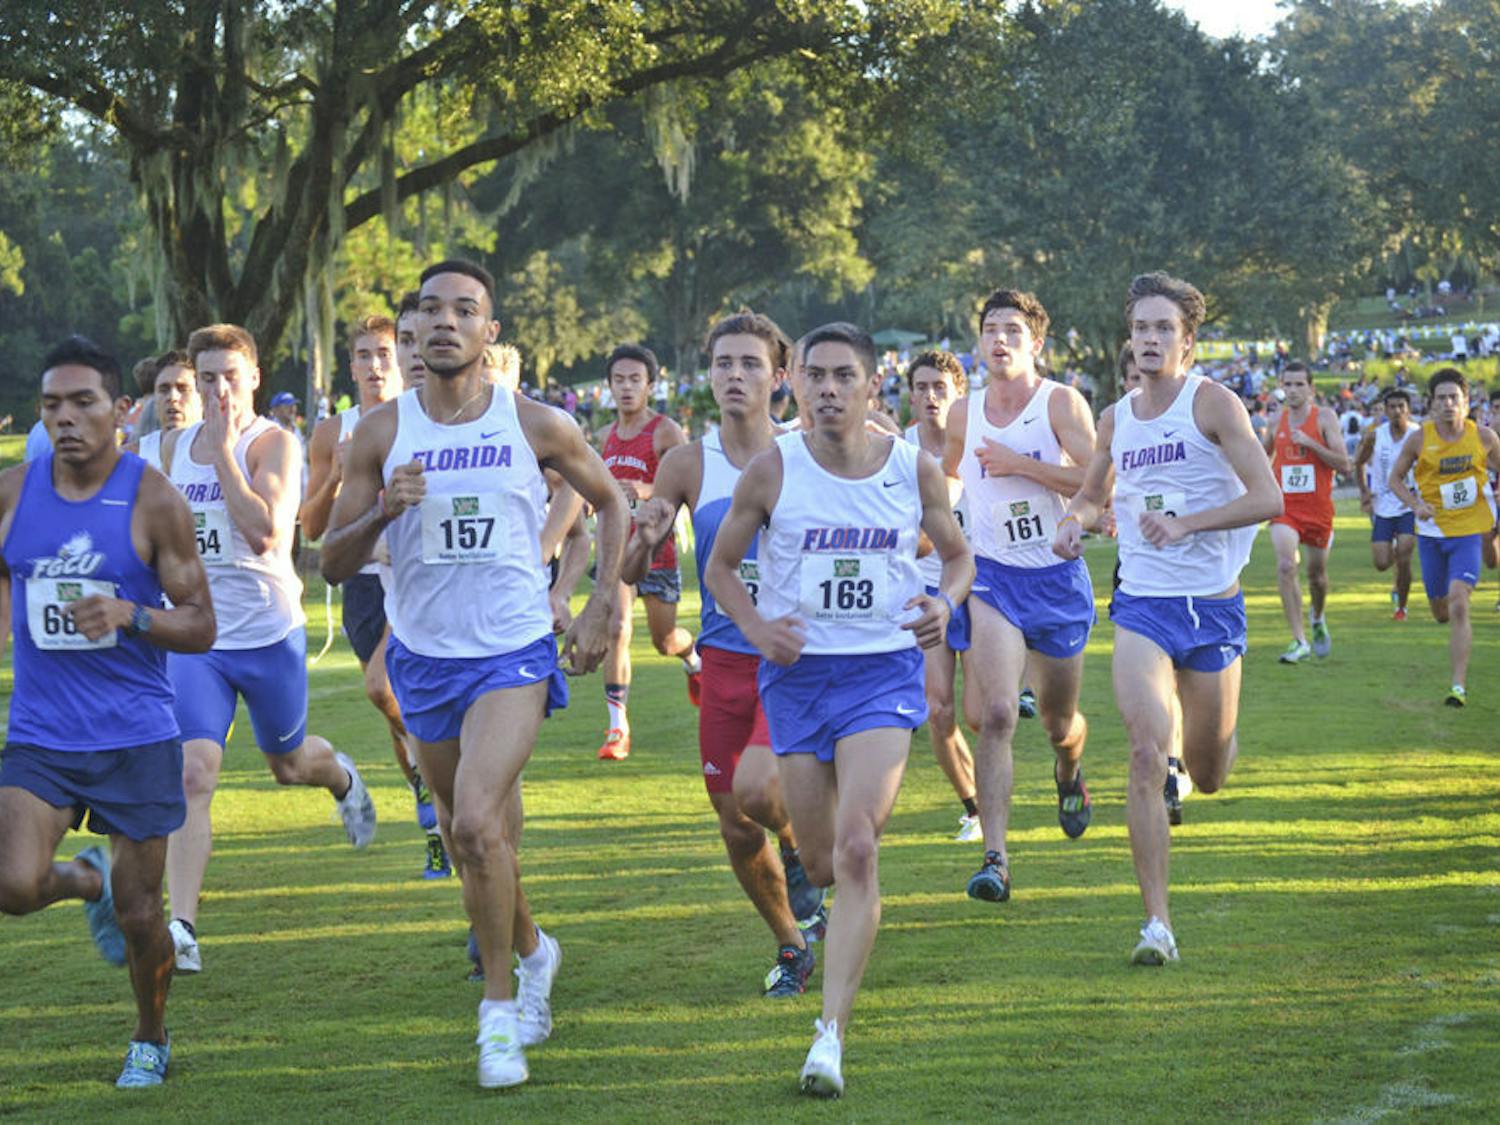 UF's Eddie Garcia (157) leads the pack during the Mountain Dew Invitational on Sept. 19, 2015, at the Mark Bostick Golf Course.